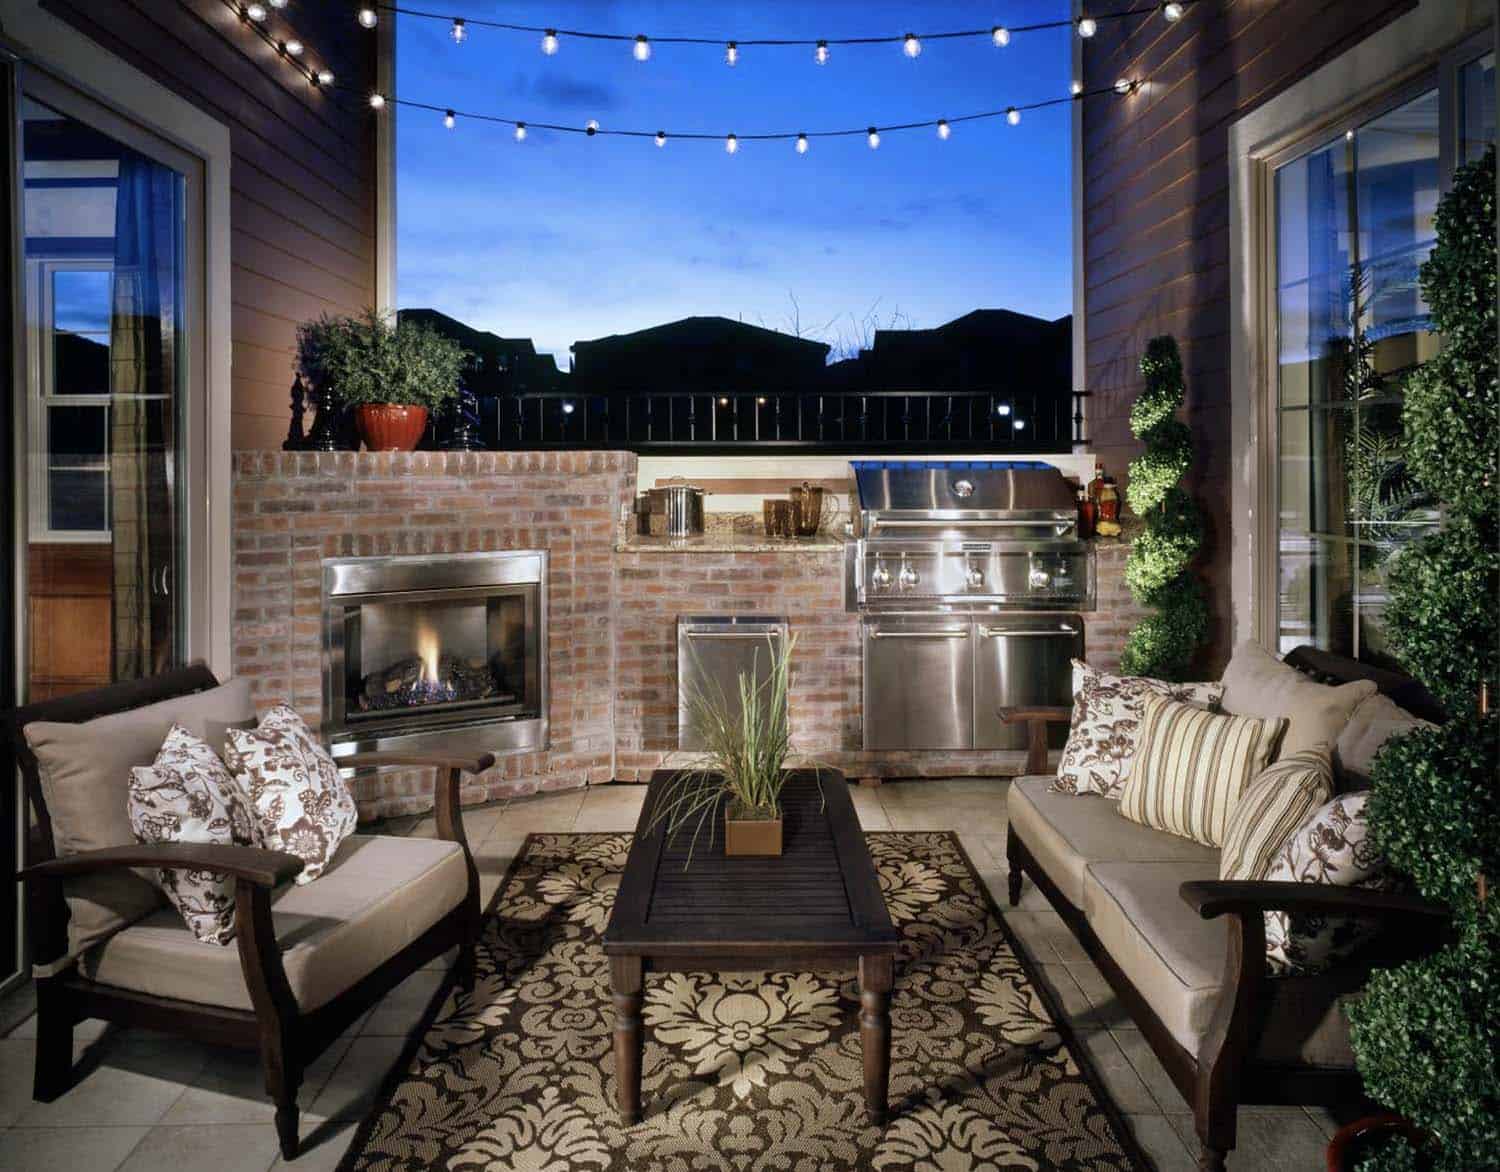 urban patio with a fireplace, grill, and outdoor furniture